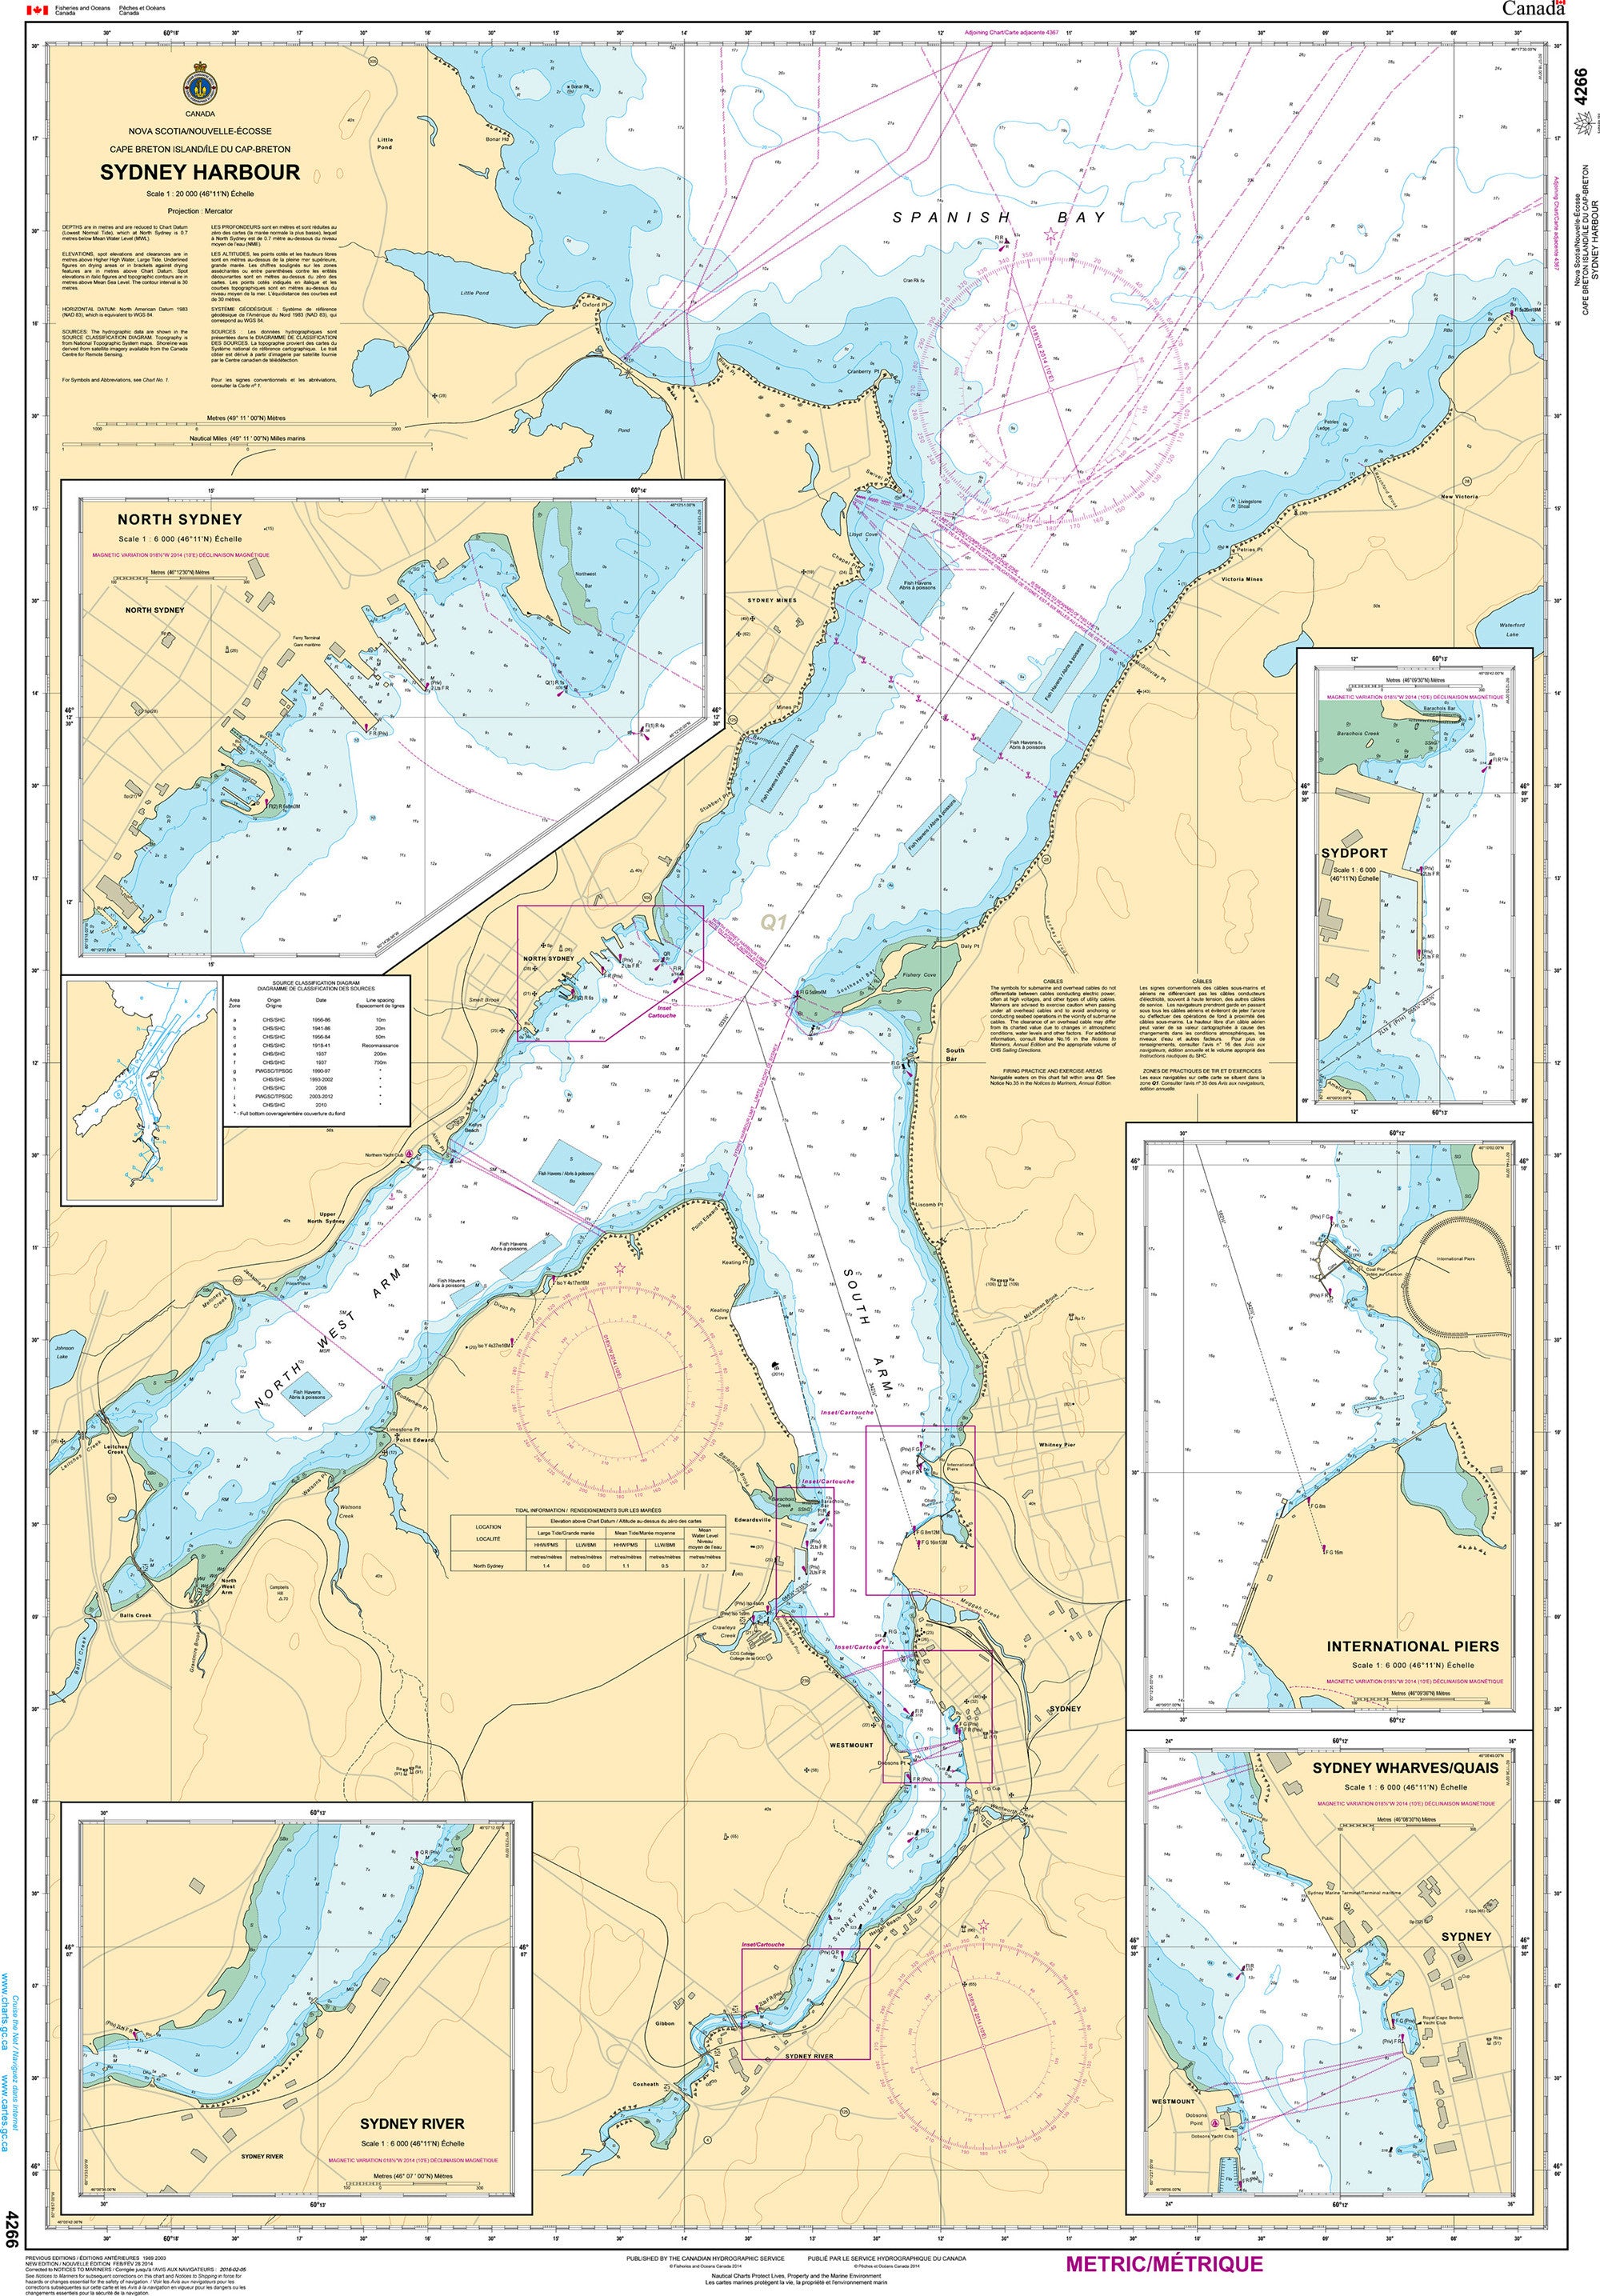 Canadian Hydrographic Service Nautical Chart CHS4266: Sydney Harbour